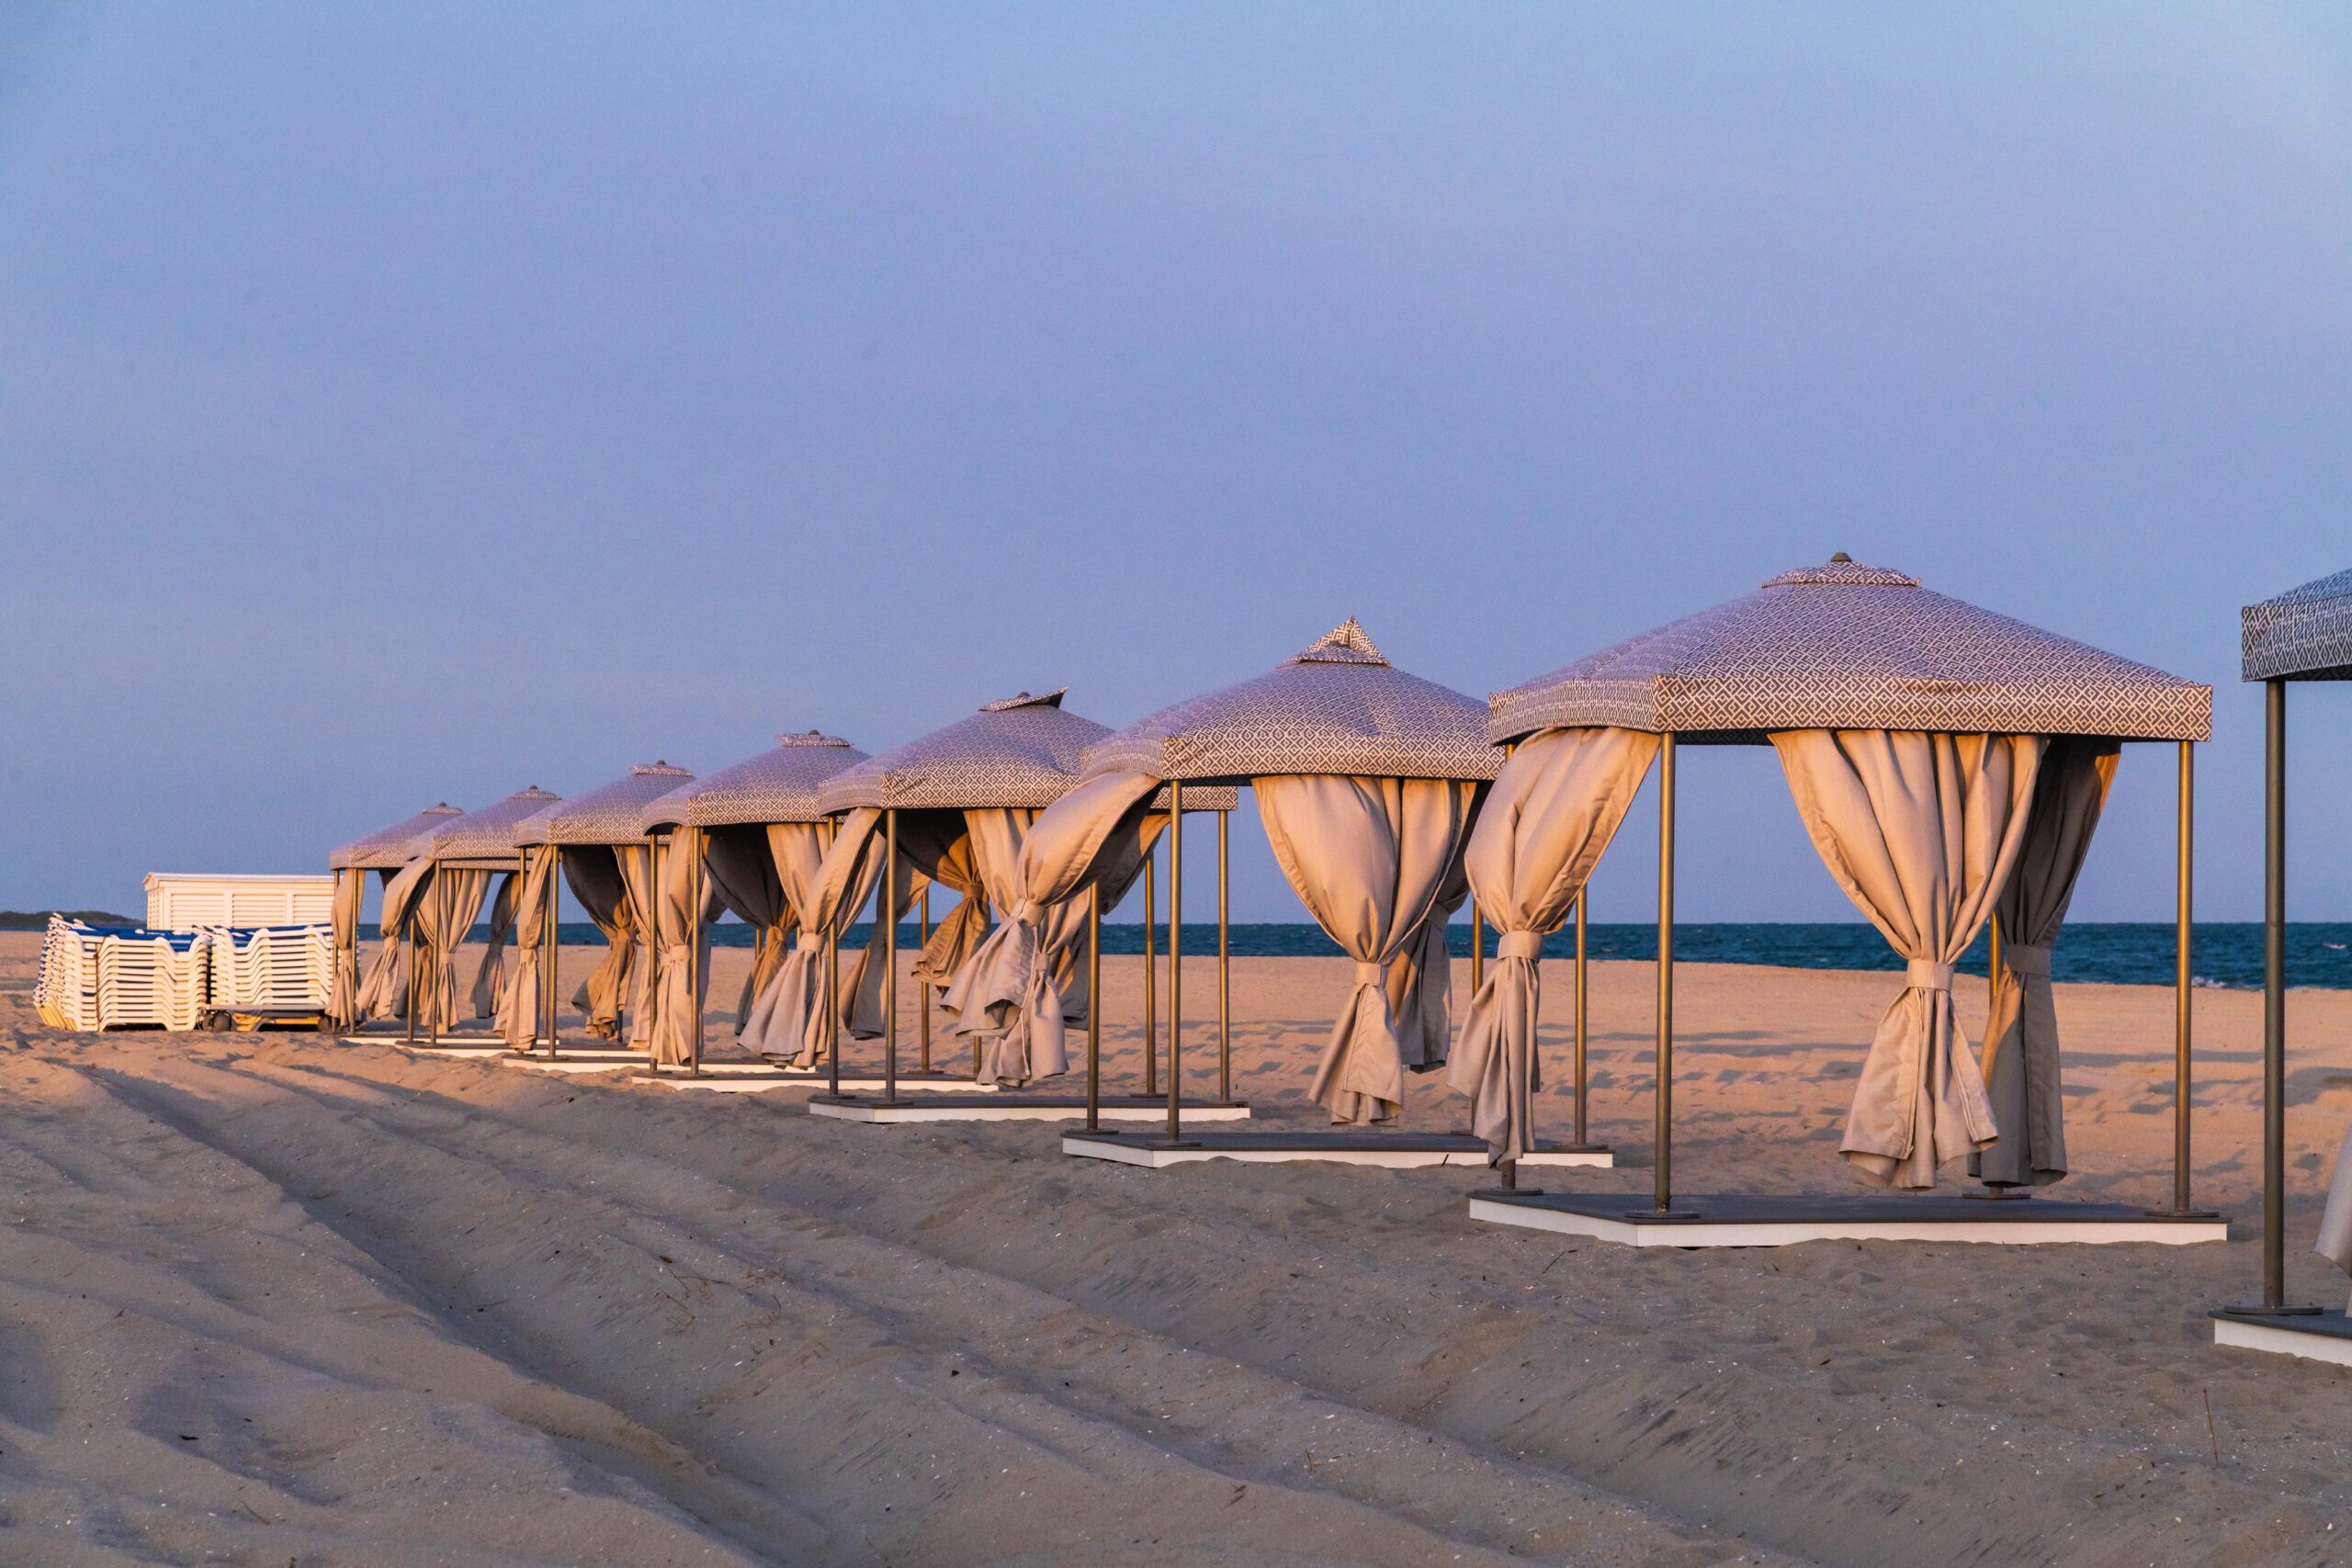 Tan beach cabanas lined up in a row with beach lounge chairs with a blue sky and the ocean in the background at sunset